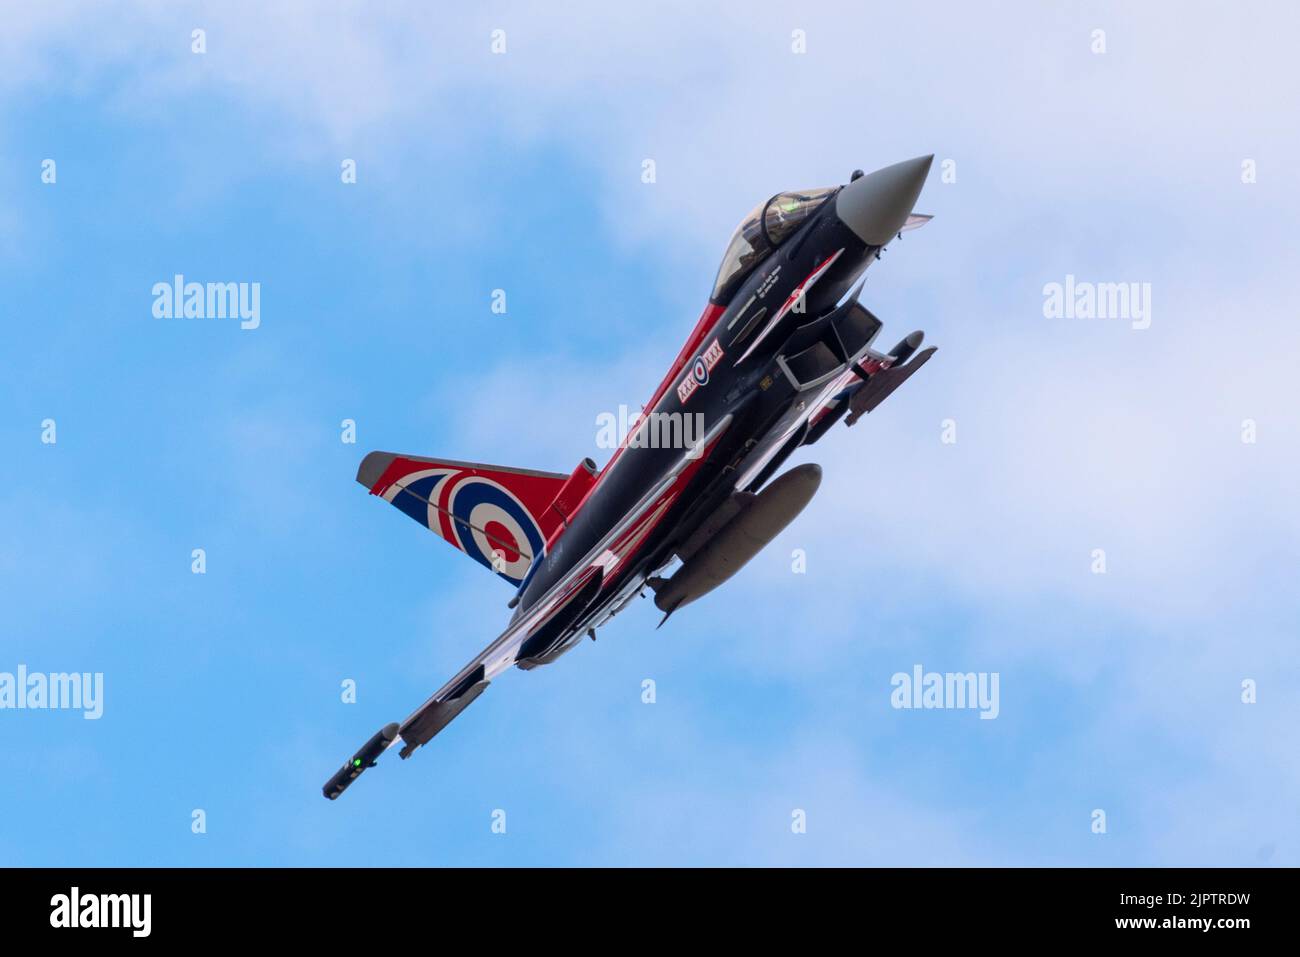 London Southend Airport, Essex, UK. 20th Aug, 2022. The RAF’s Typhoon jet fighters are using the civilian airport to operate from for this weekend’s airshows at Eastbourne and Folkestone. The RAF Typhoon fighter jet named Blackjack painted in patriotic Union Flag colour scheme Stock Photo